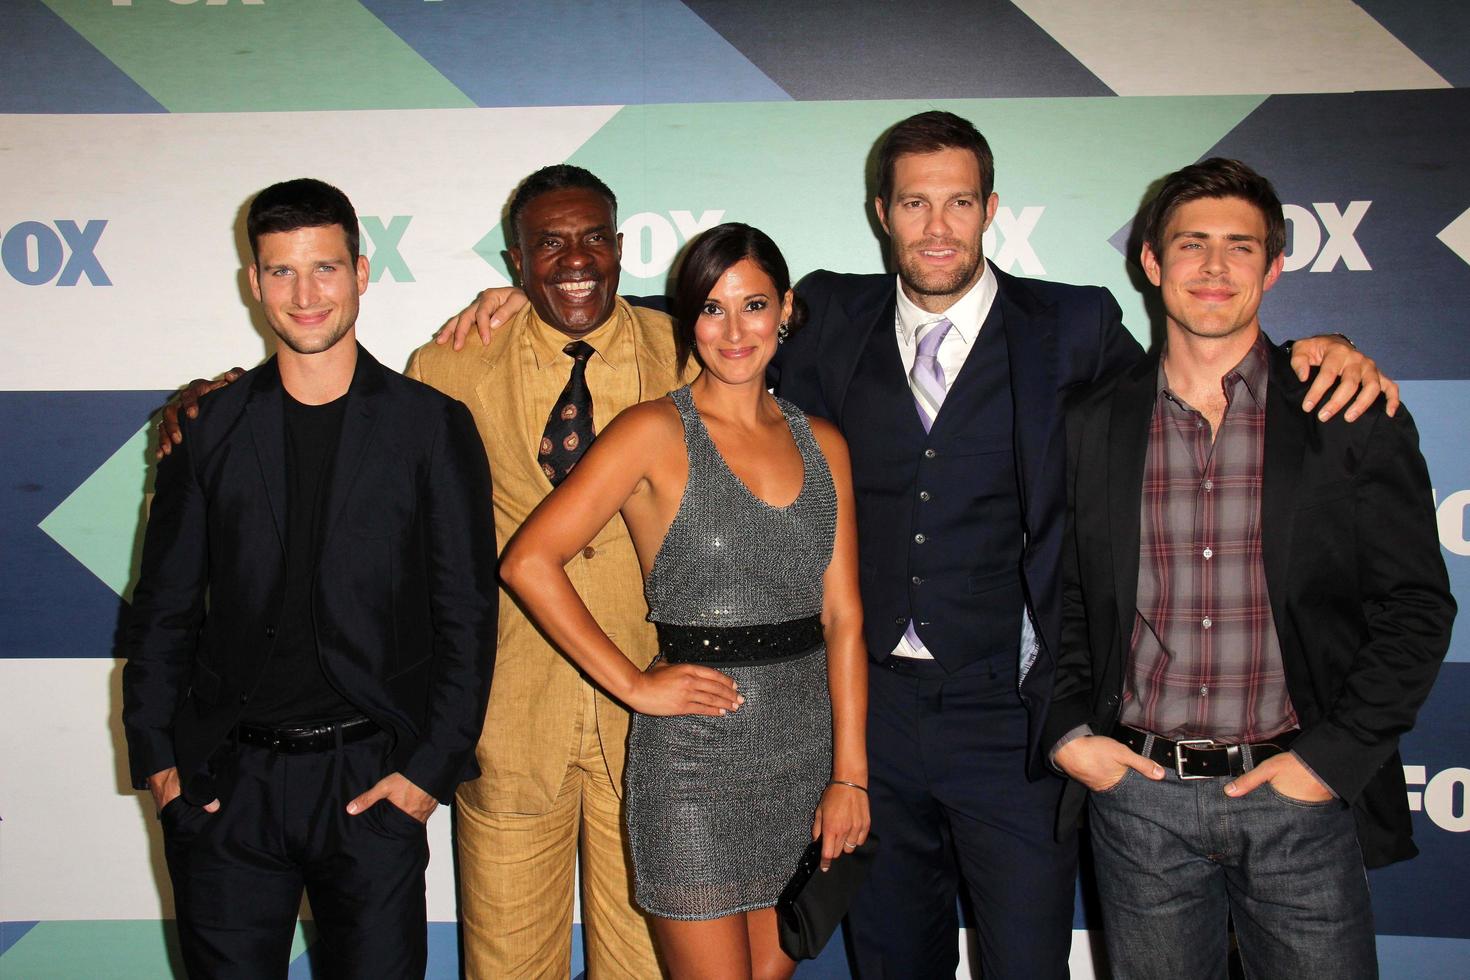 SLOS ANGELES, AUG 1 - Parker Young, Keith David, Angelique Cabral, Geoff Stults, Chris Lowell arrives at the Fox All-Star Summer 2013 TCA Party at the SoHo House on August 1, 2013 in West Hollywood, CA photo